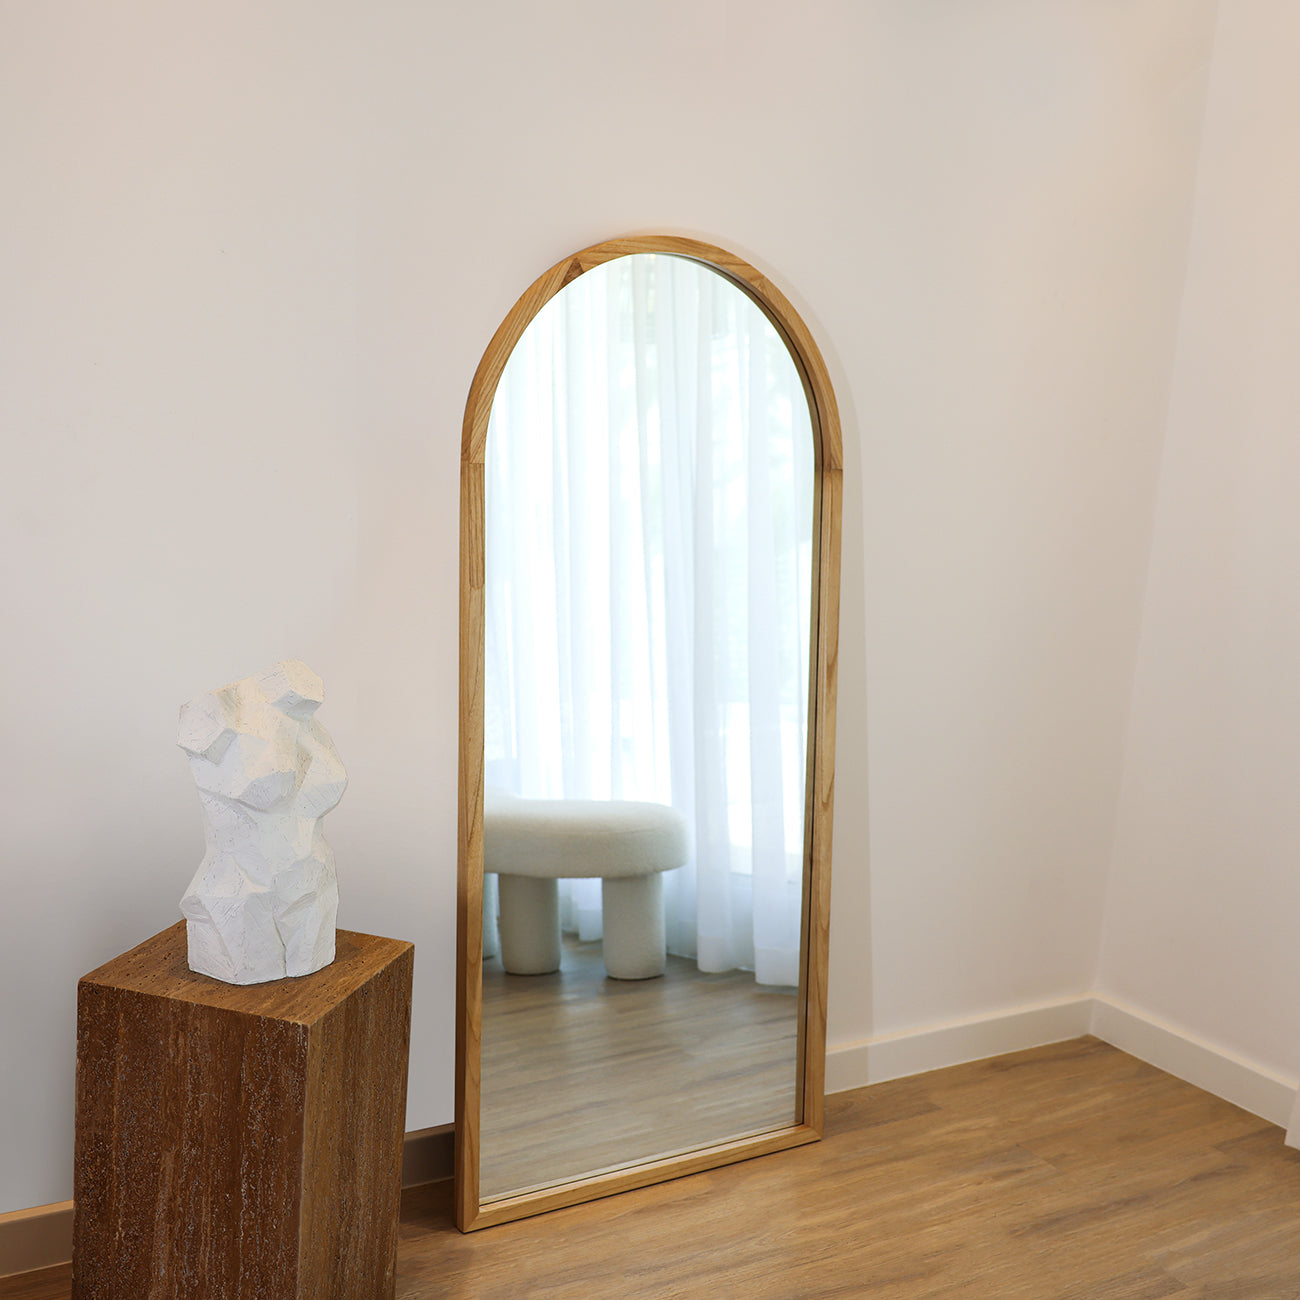 NOOR - HAND MADE SYCAMORE WOOD FULL LENGTH ARCHED MIRROR 170CM X 80CM